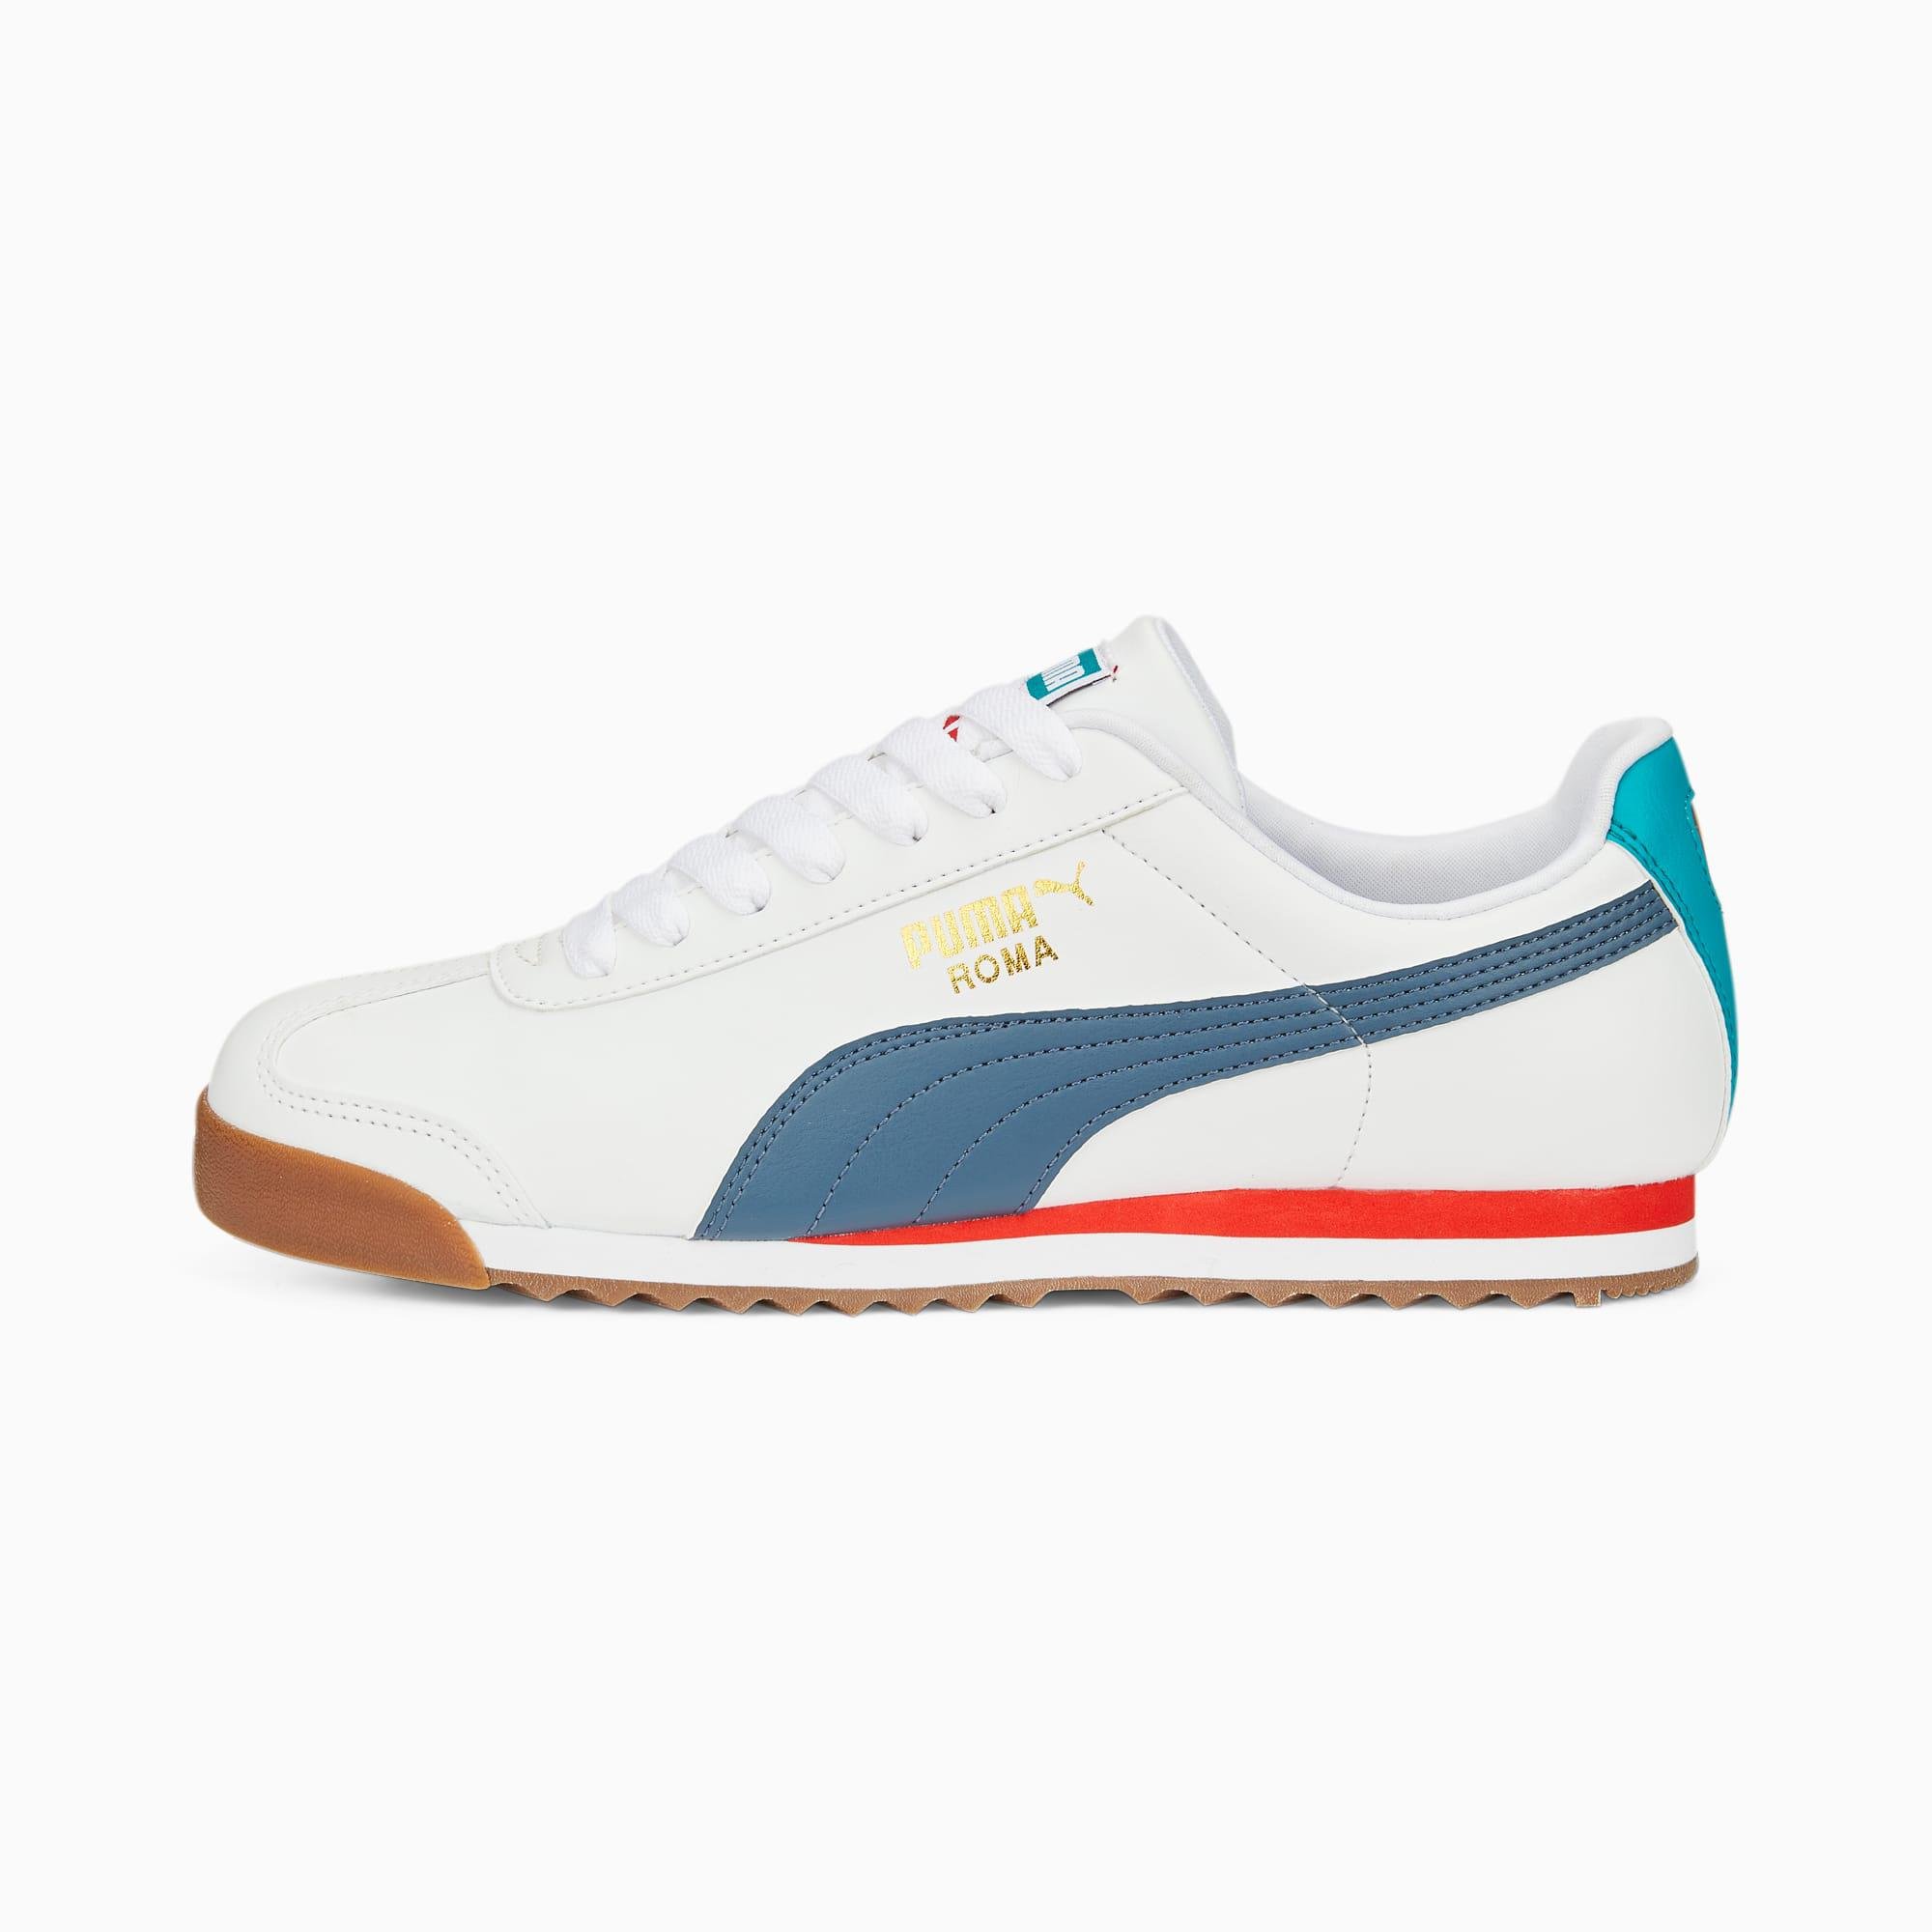 Roma Basic+ Sneakers by PUMA | jellibeans